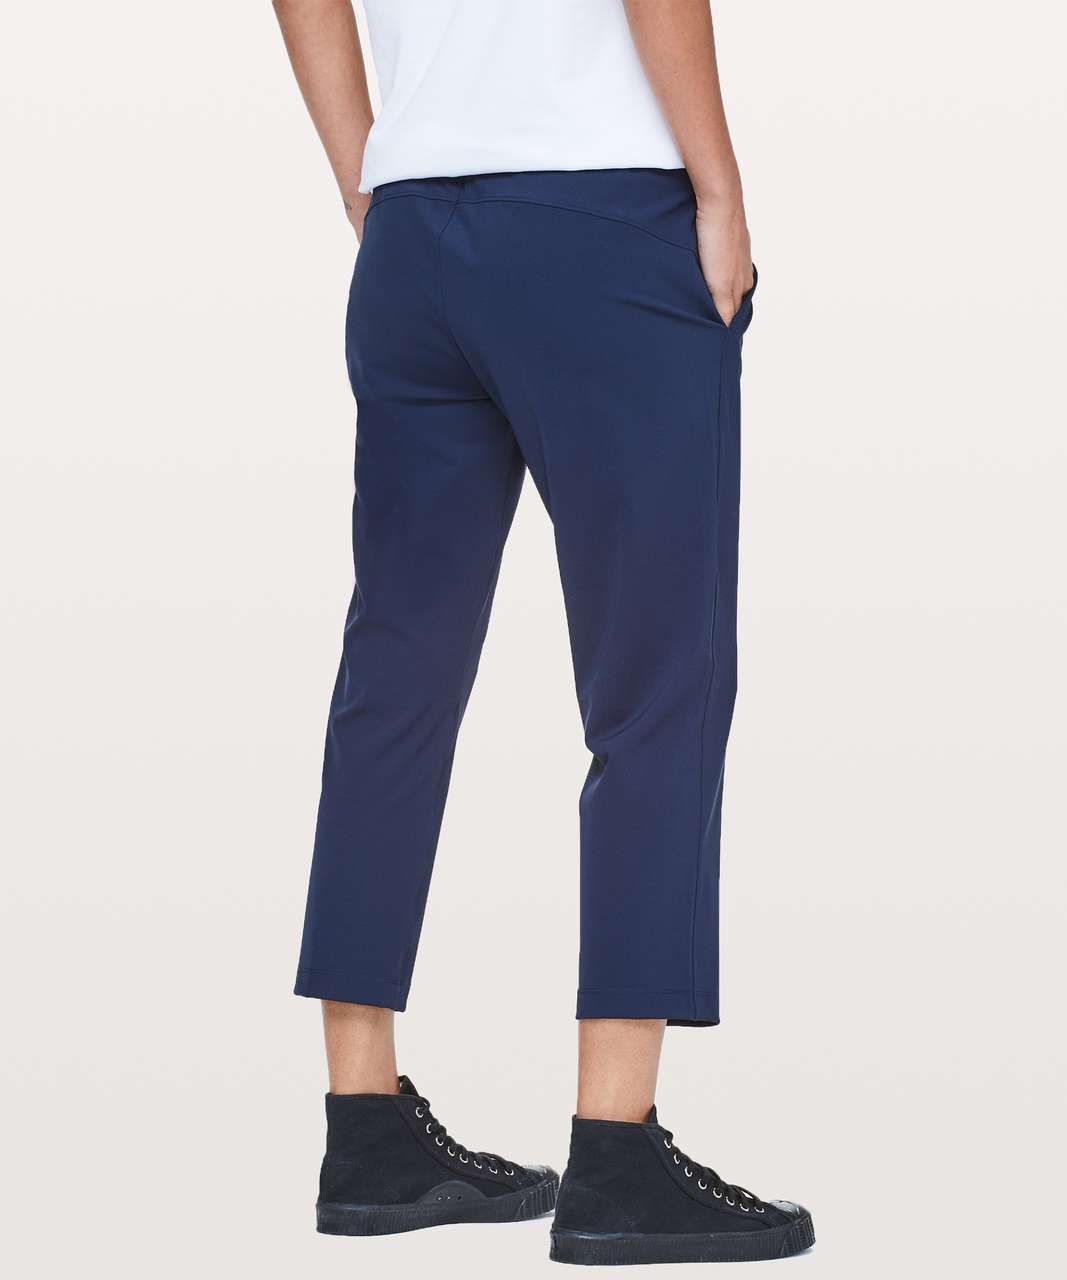 Lululemon On The Fly Crop *23" - True Navy (First Release)